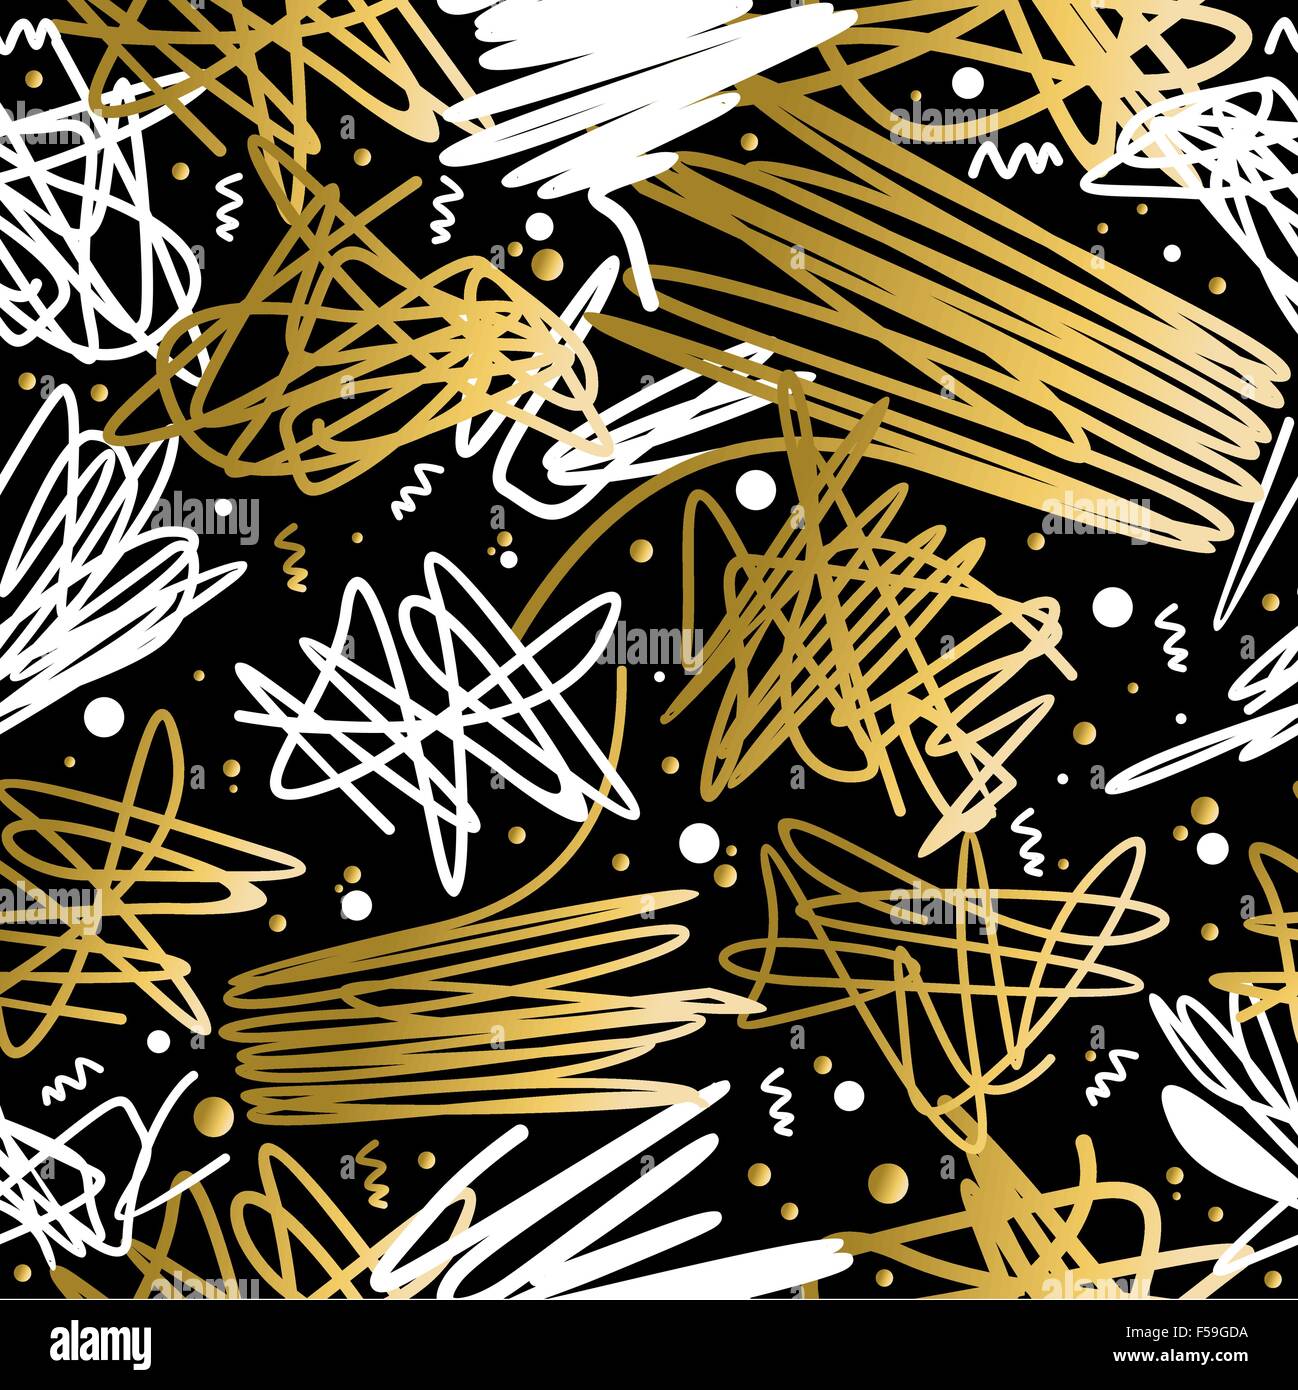 Fancy golden retro 80s fashion seamless pattern abstract scribble, doodle illustration background. Ideal for greeting card Stock Vector